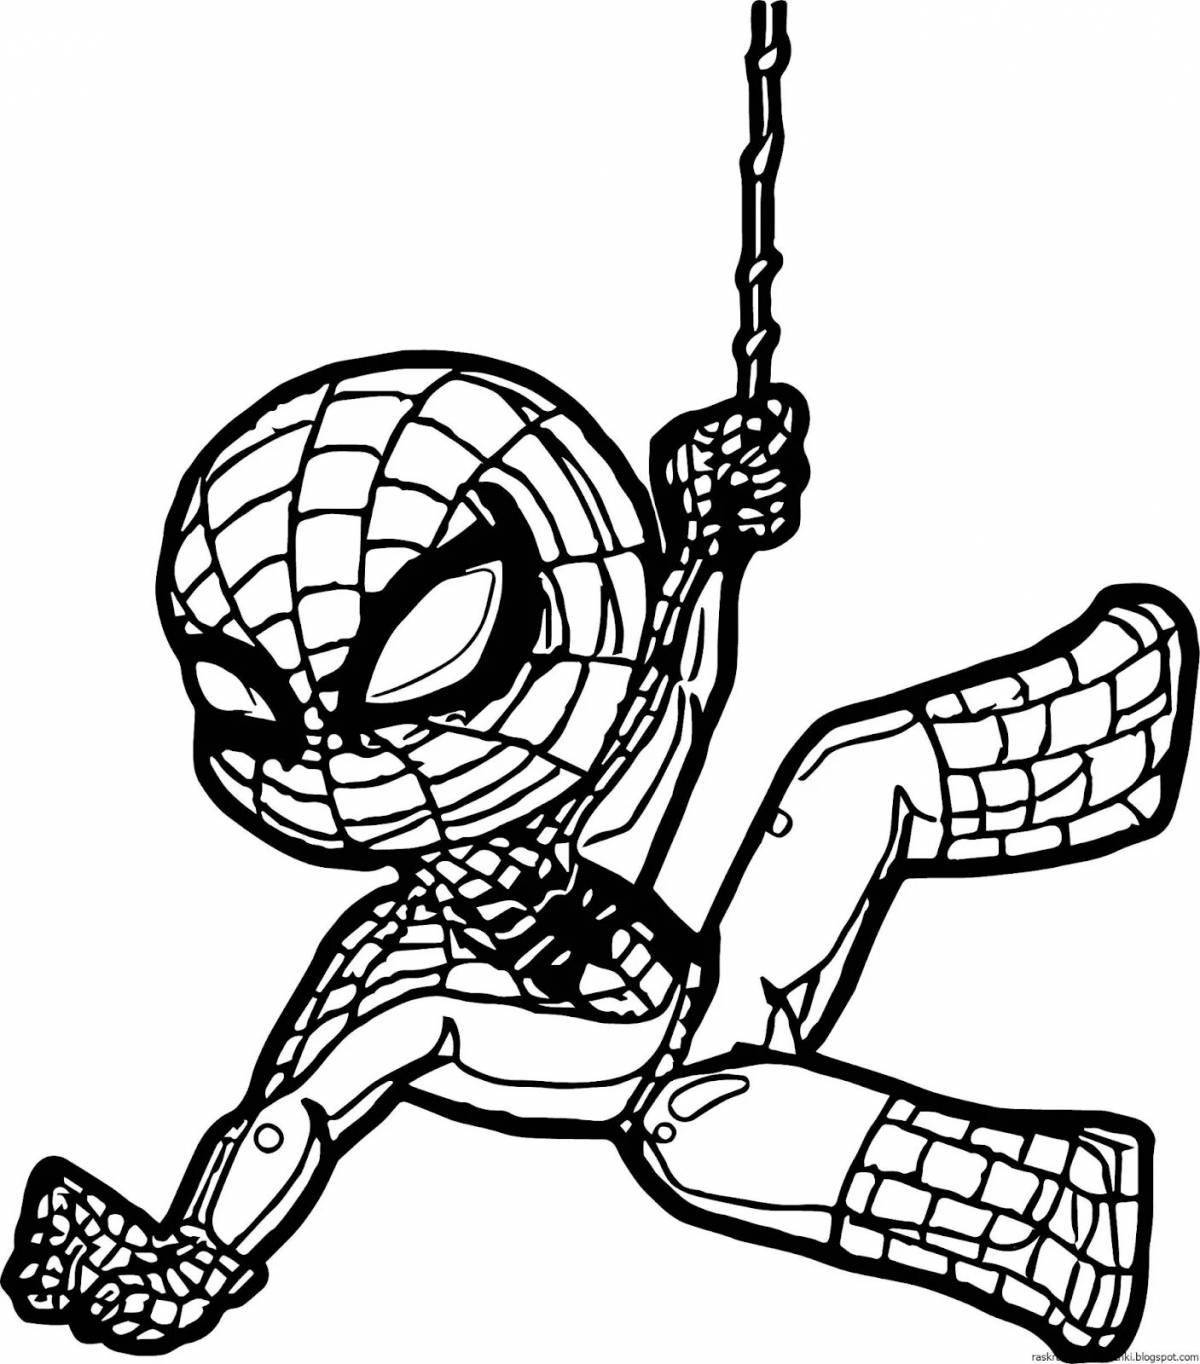 Spider-man colorful coloring book for 6-7 year olds